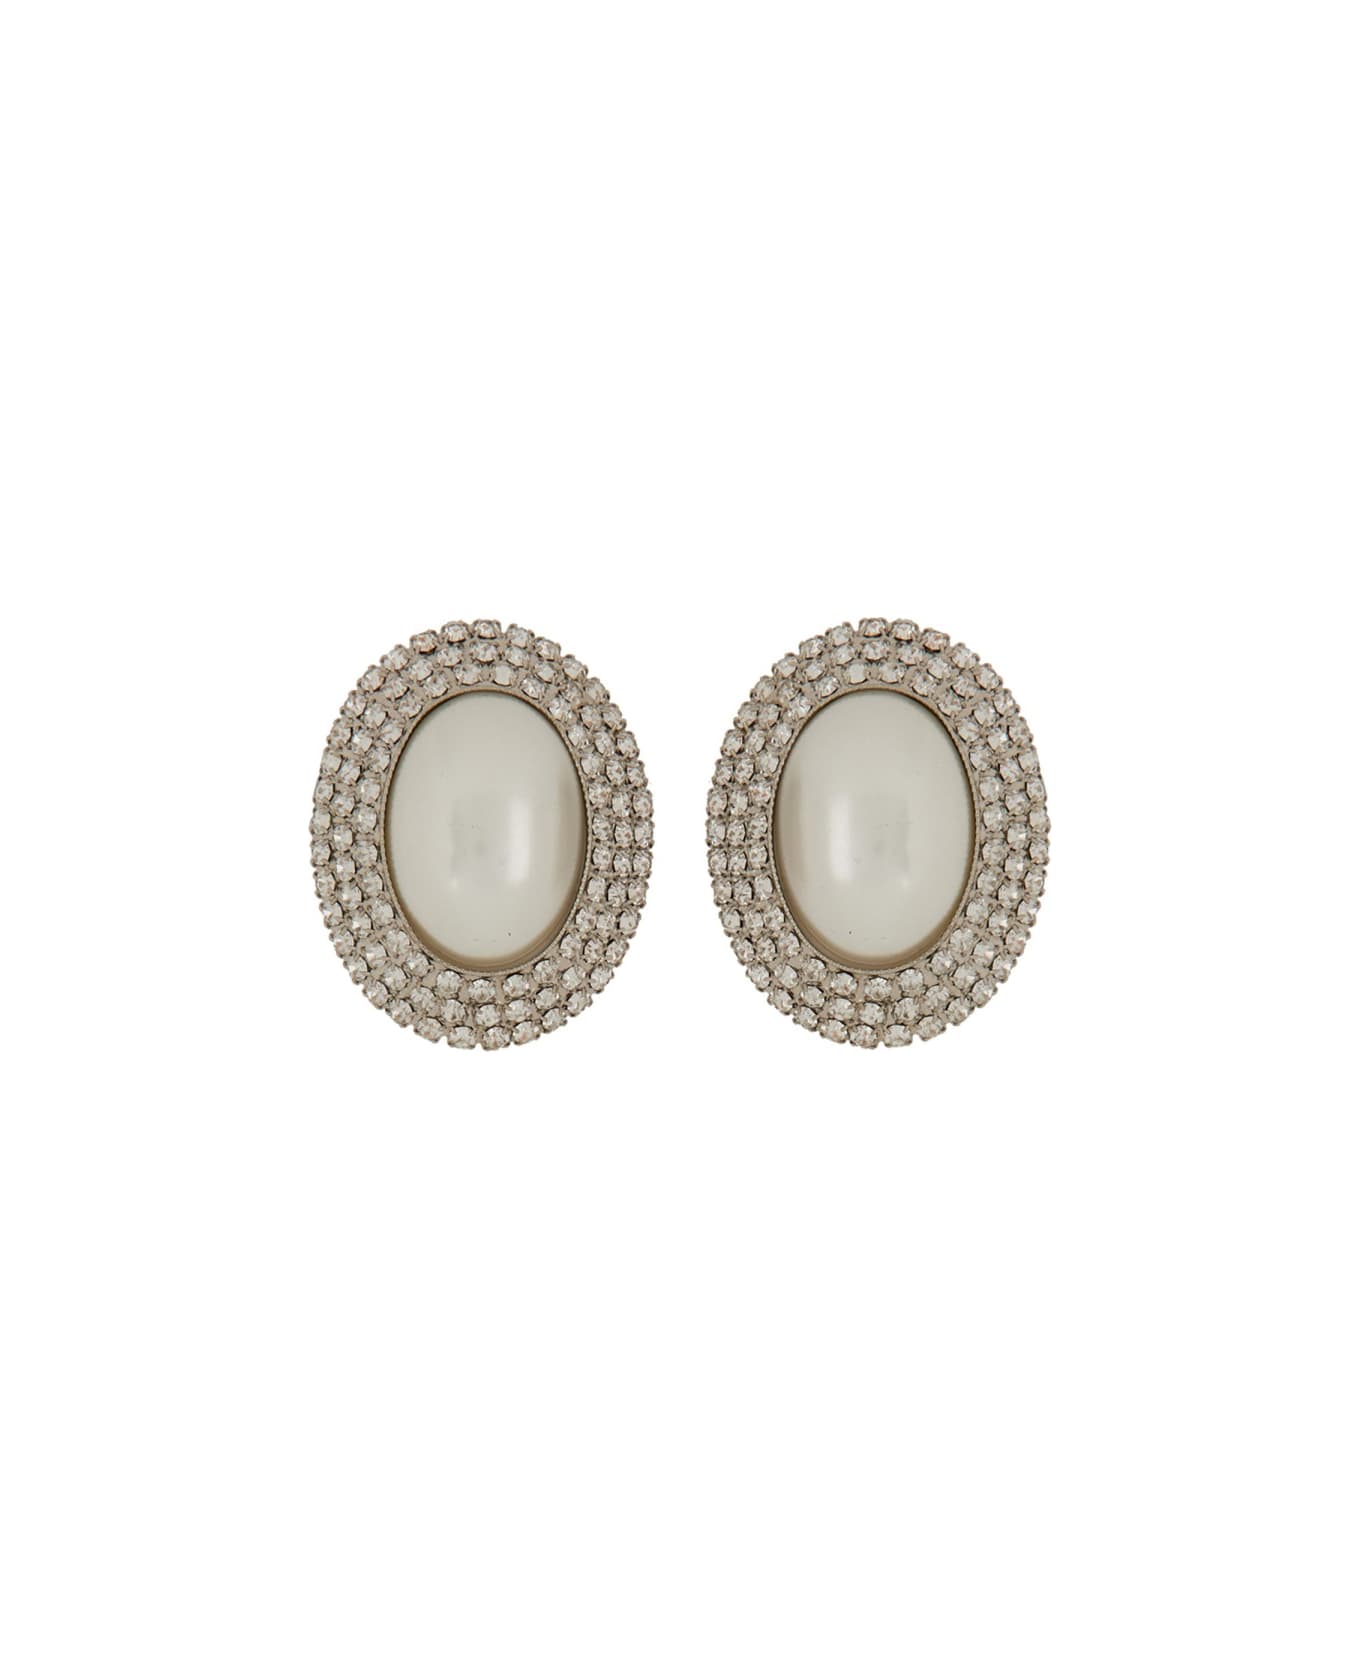 Alessandra Rich Oval Earrings With Pearl And Crystals - SILVER